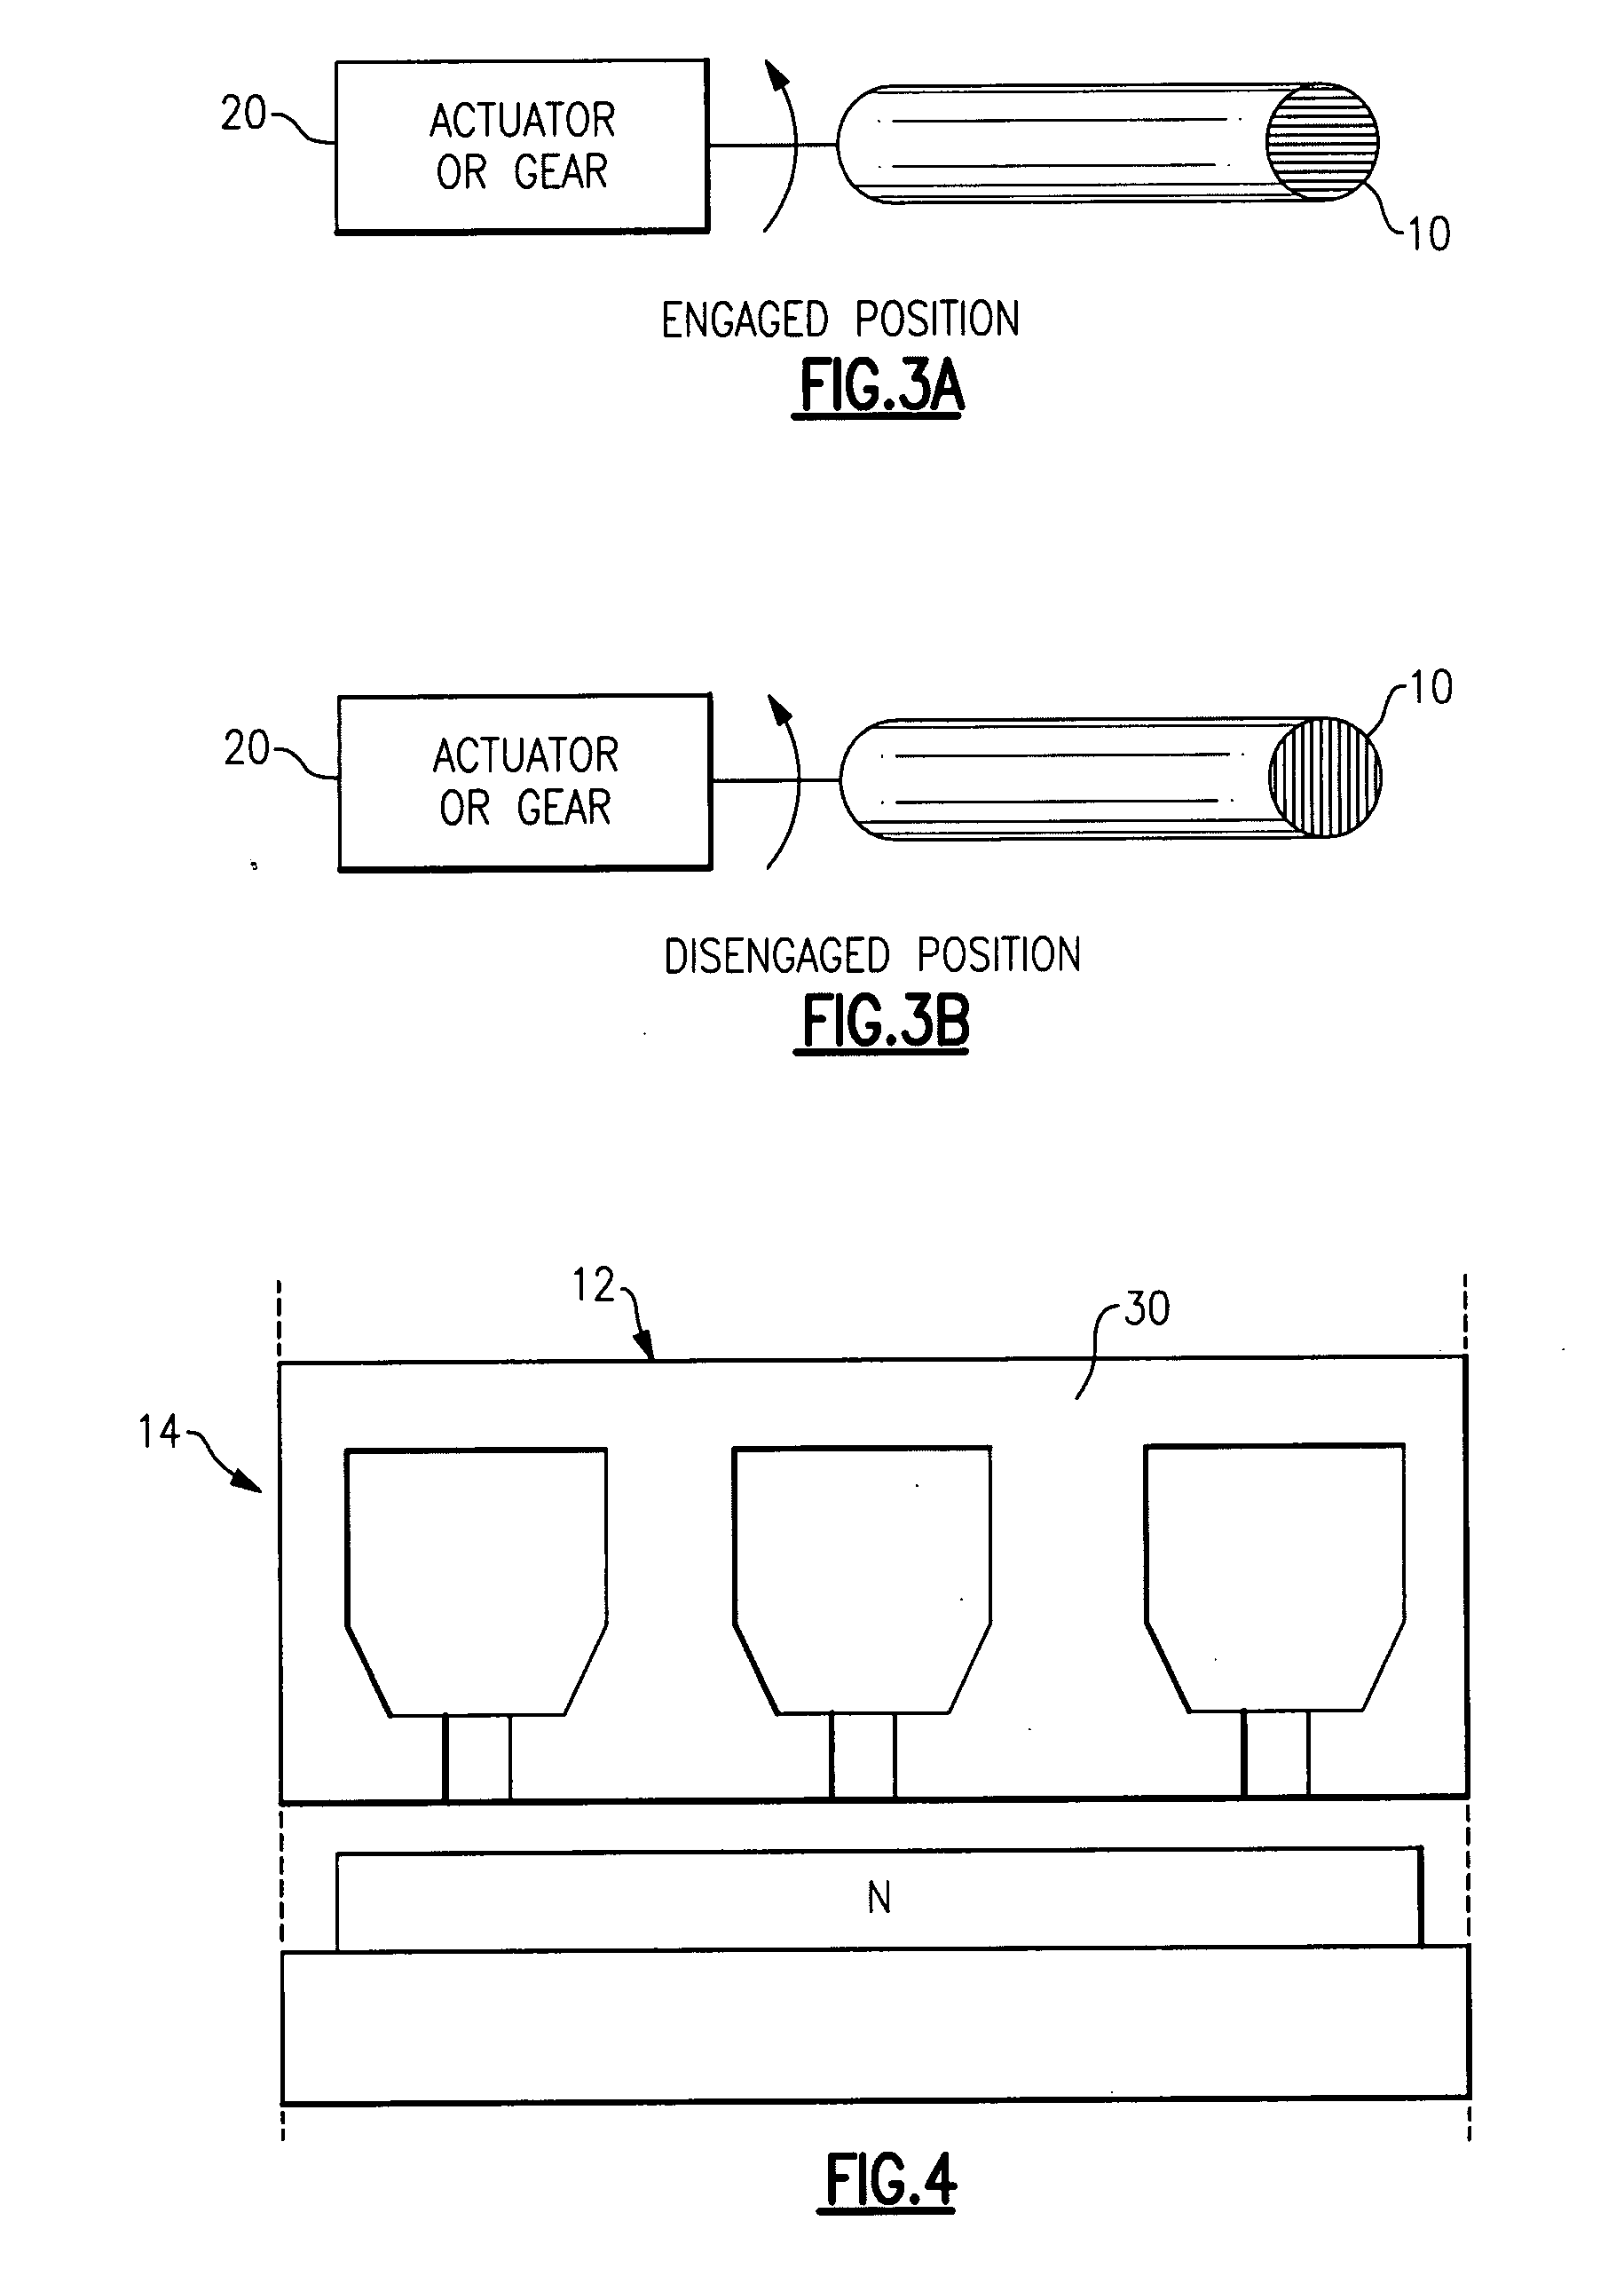 Fault-tolerant permanent magnet machine with reconfigurable flux paths in stator back iron